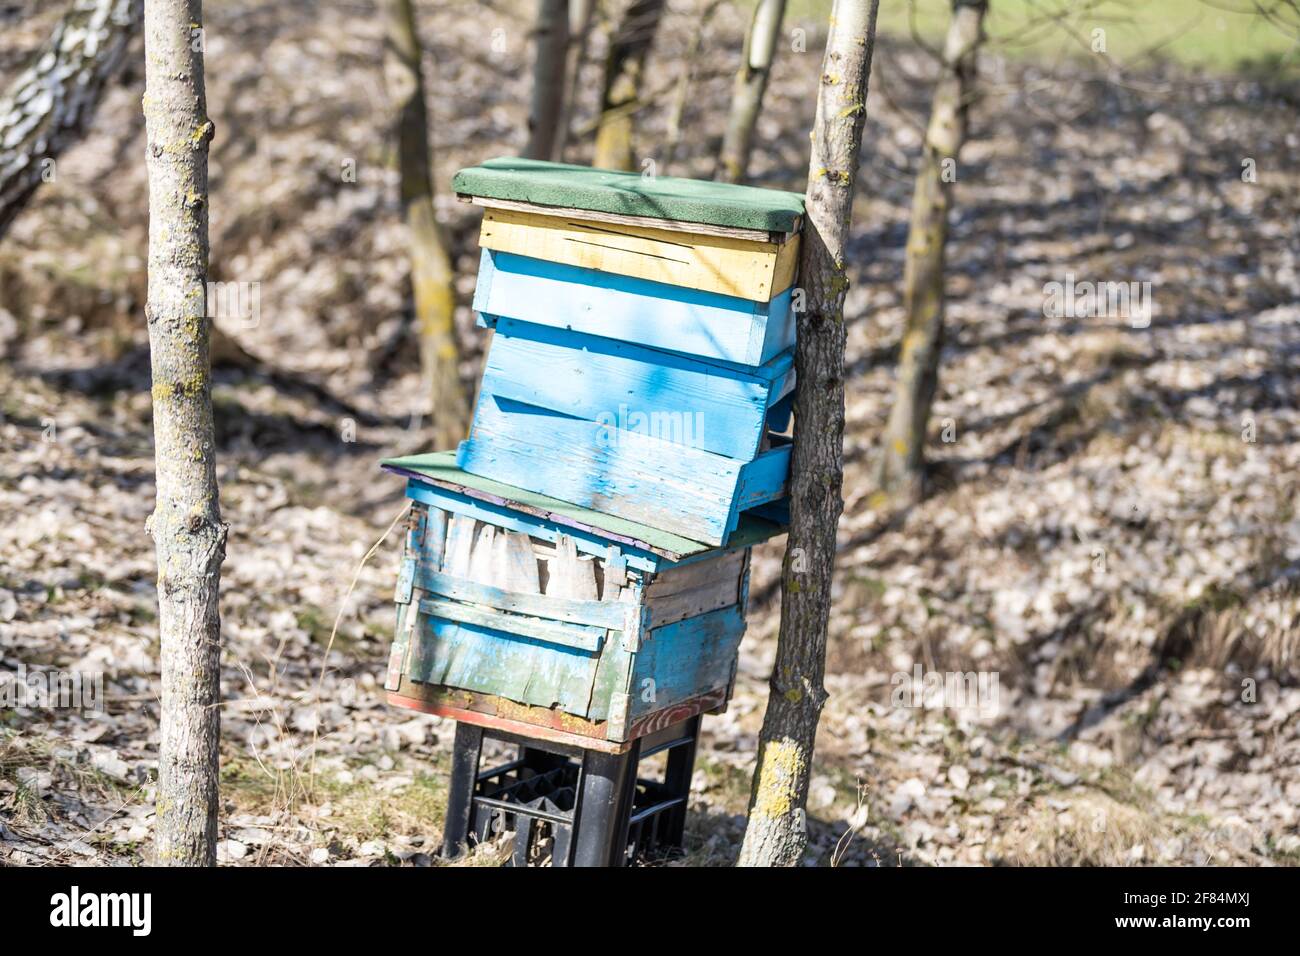 Beehives in a field with trees, hives. Stock Photo